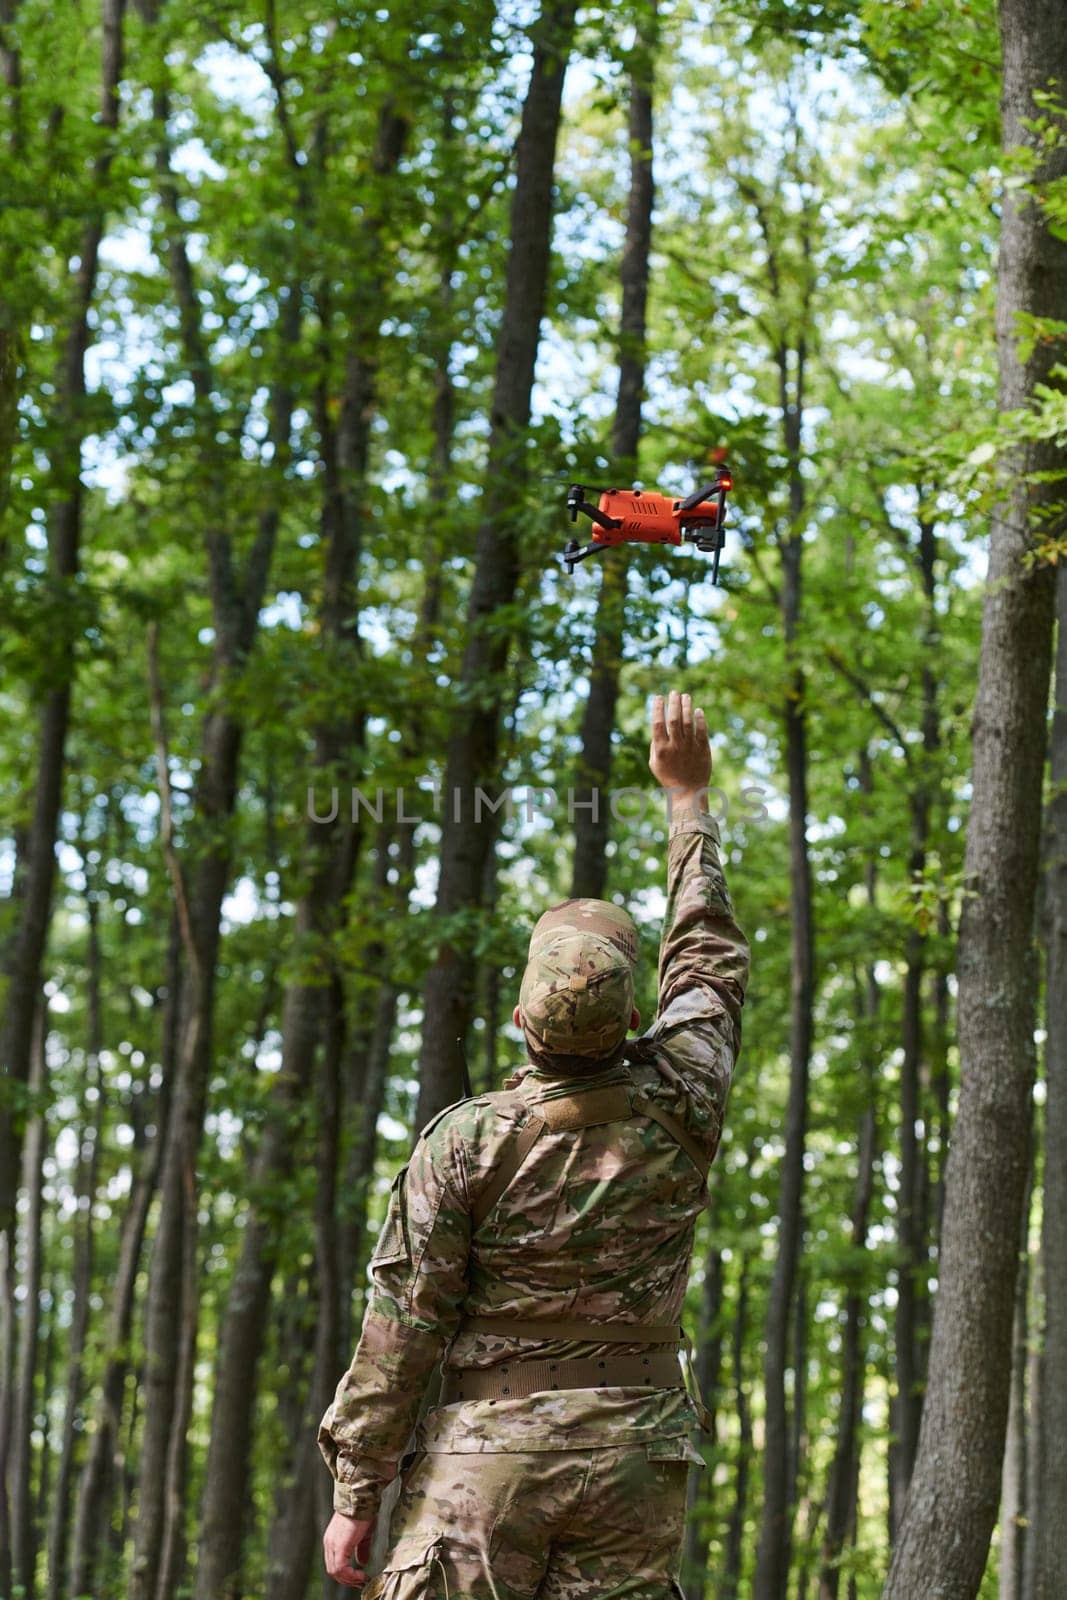 Elite military unit, equipped with state-of-the-art technology including a drone, strategically navigates and surveys dangerous wooded terrain, showcasing their precision, cooperation, and specialized training for high-risk operations by dotshock